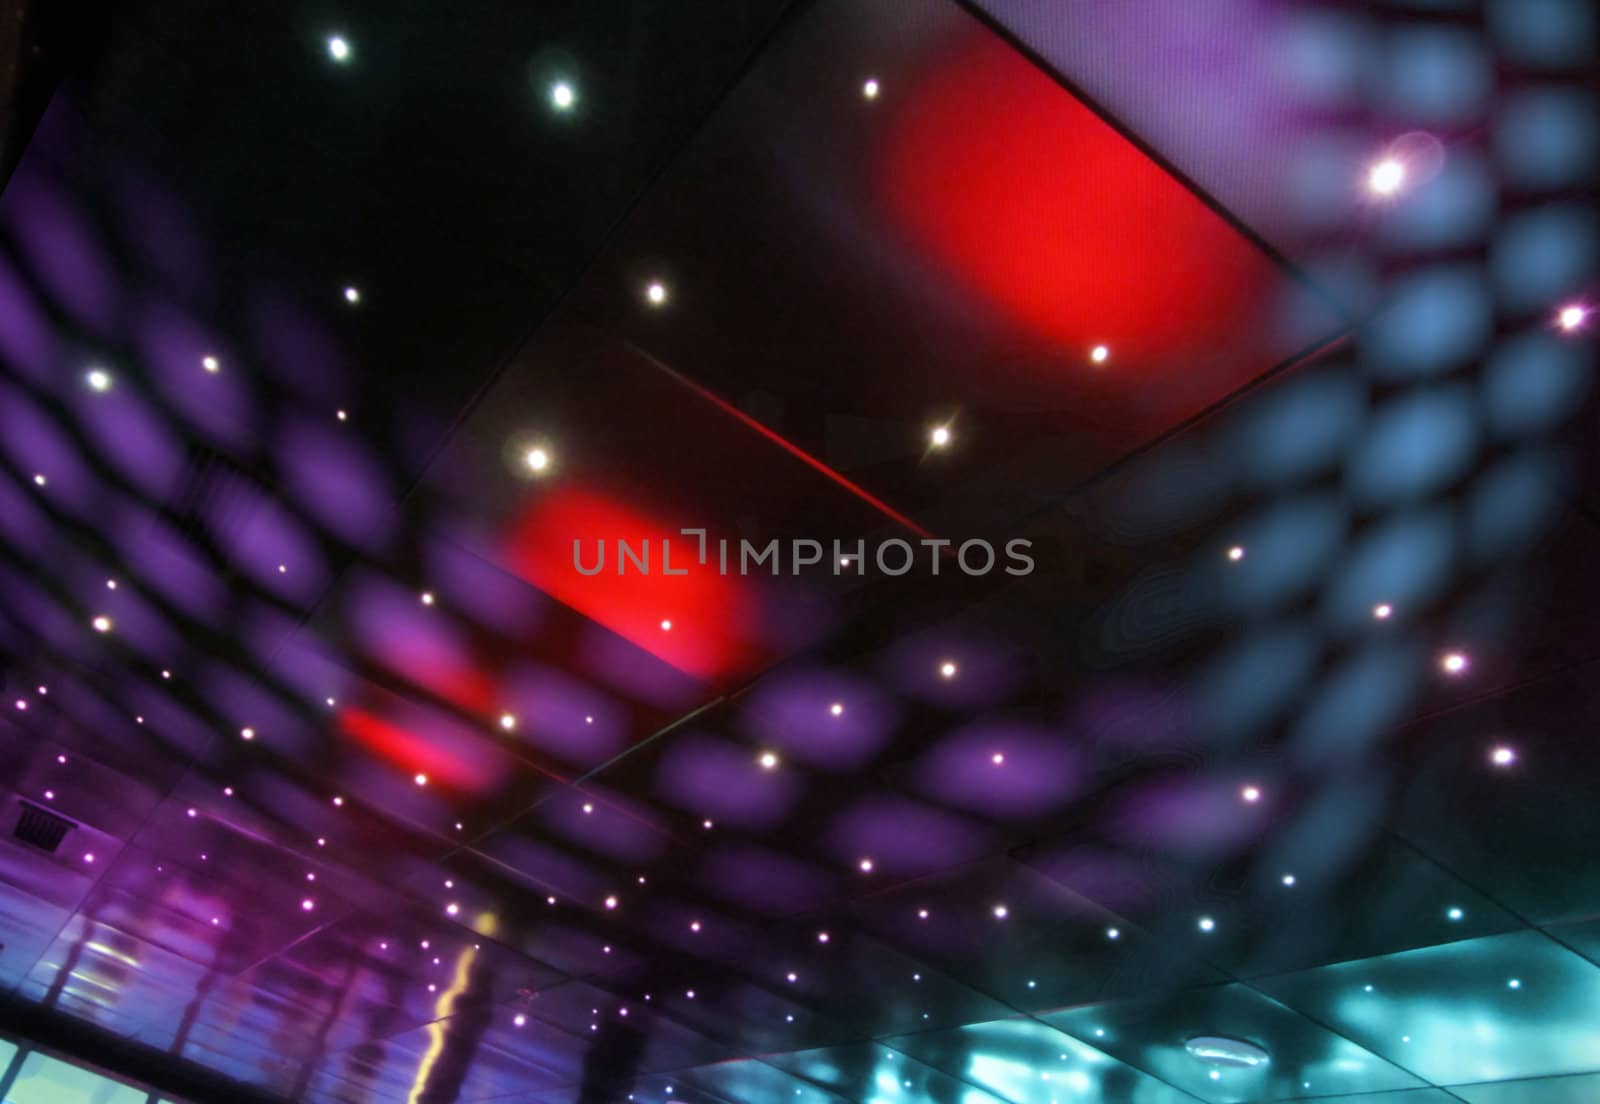 Colorful disco light spots in reflective nightclub ceiling